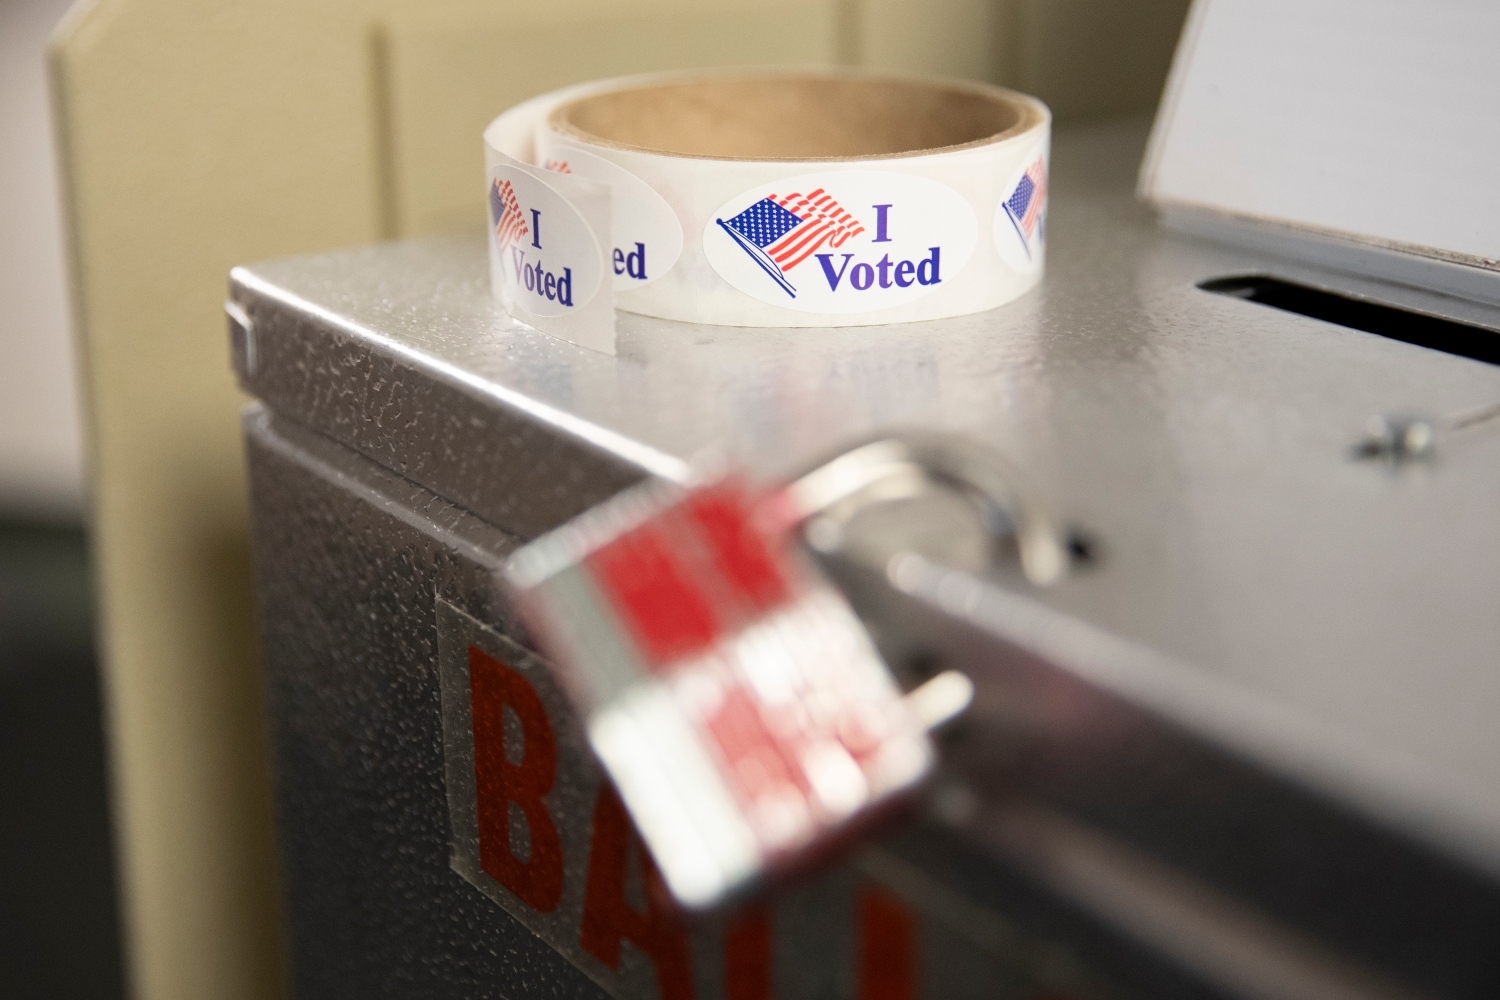 PNW elections officials amp up defenses against fraud claims ahead of midterms